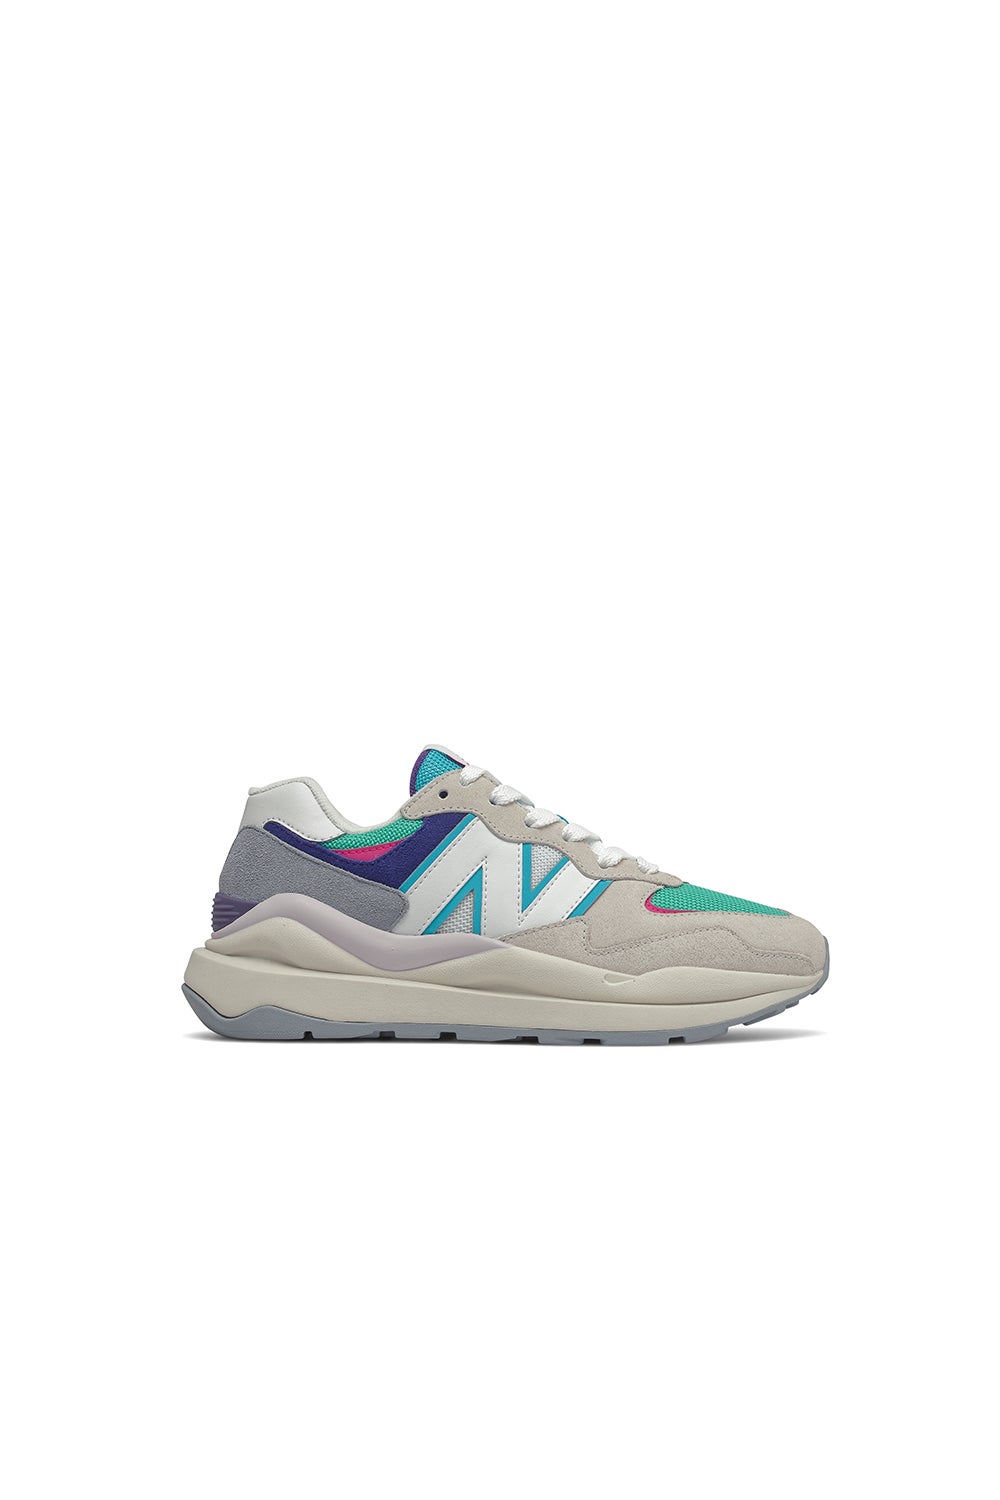 New Balance 57/40 Astral Glow with Prism Purple